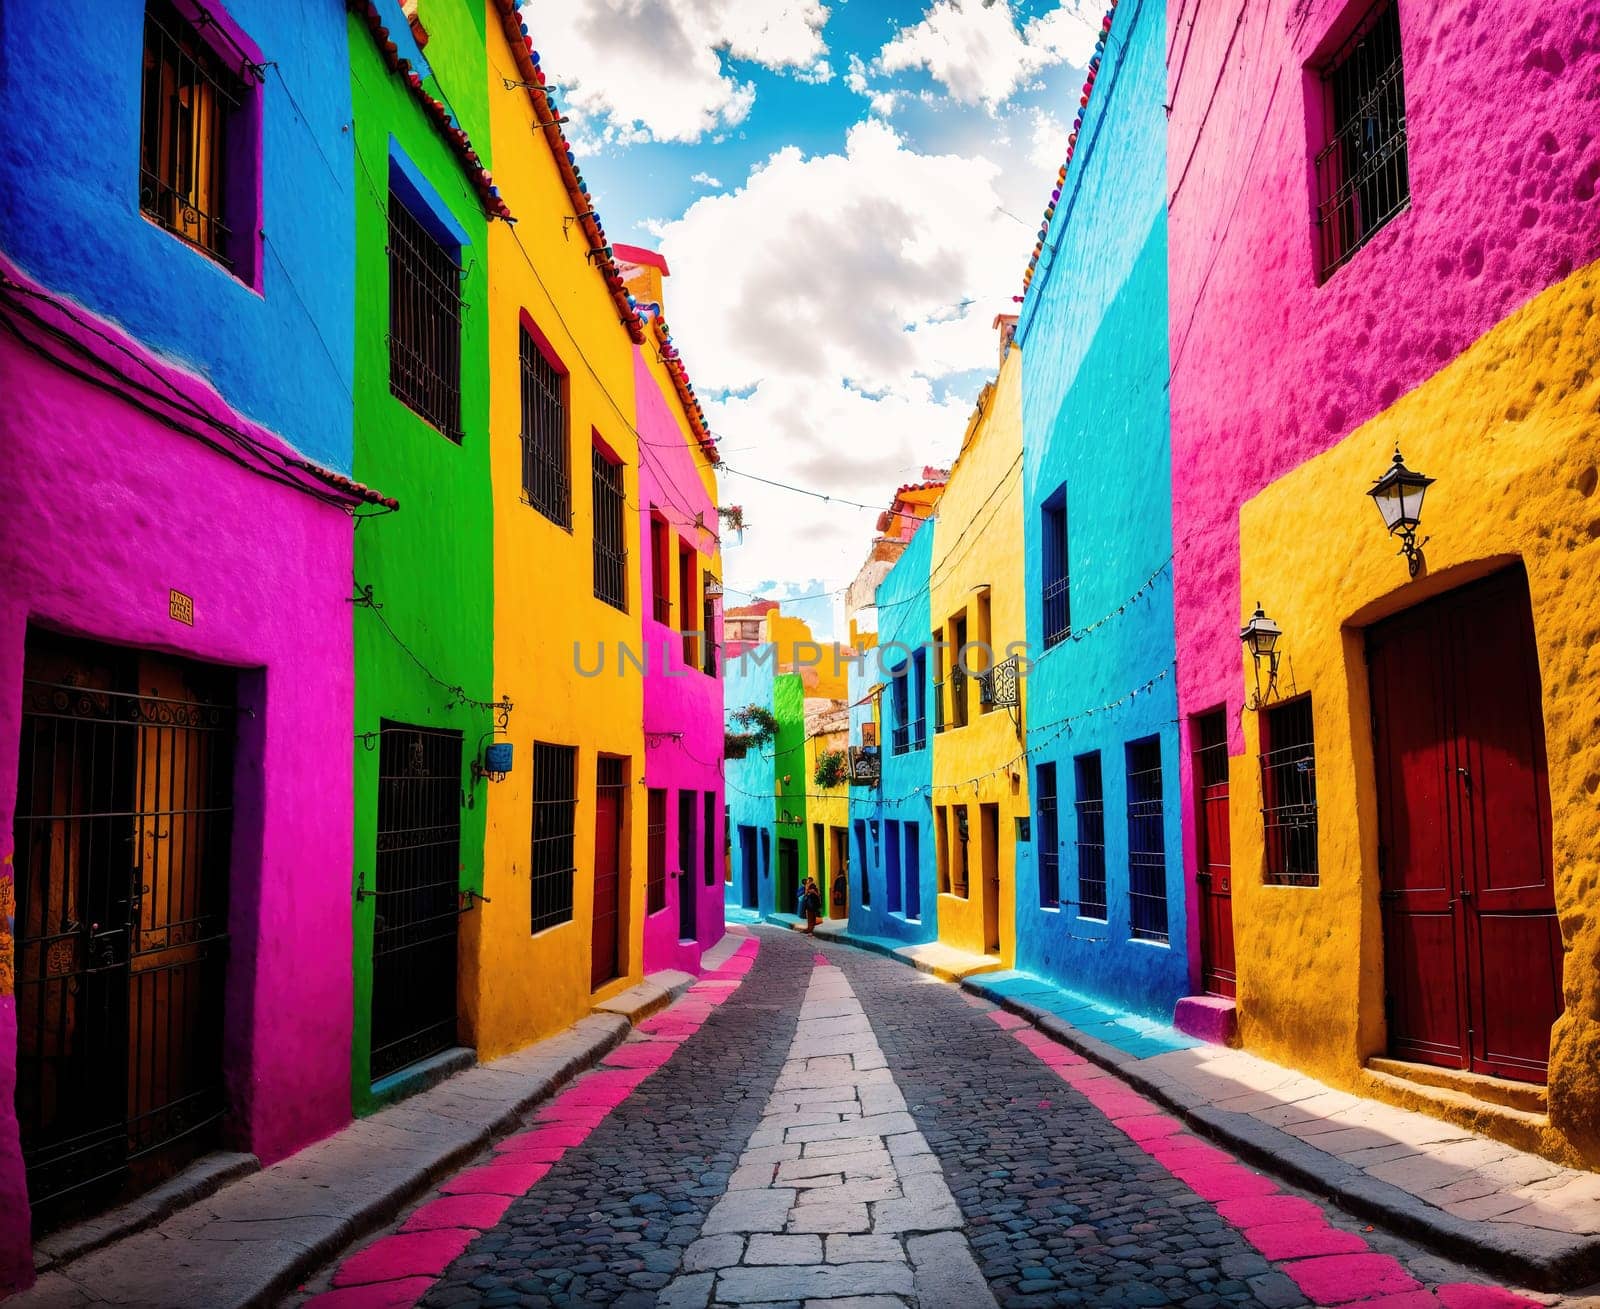 The image shows a narrow, colorful street lined with brightly painted buildings on either side.